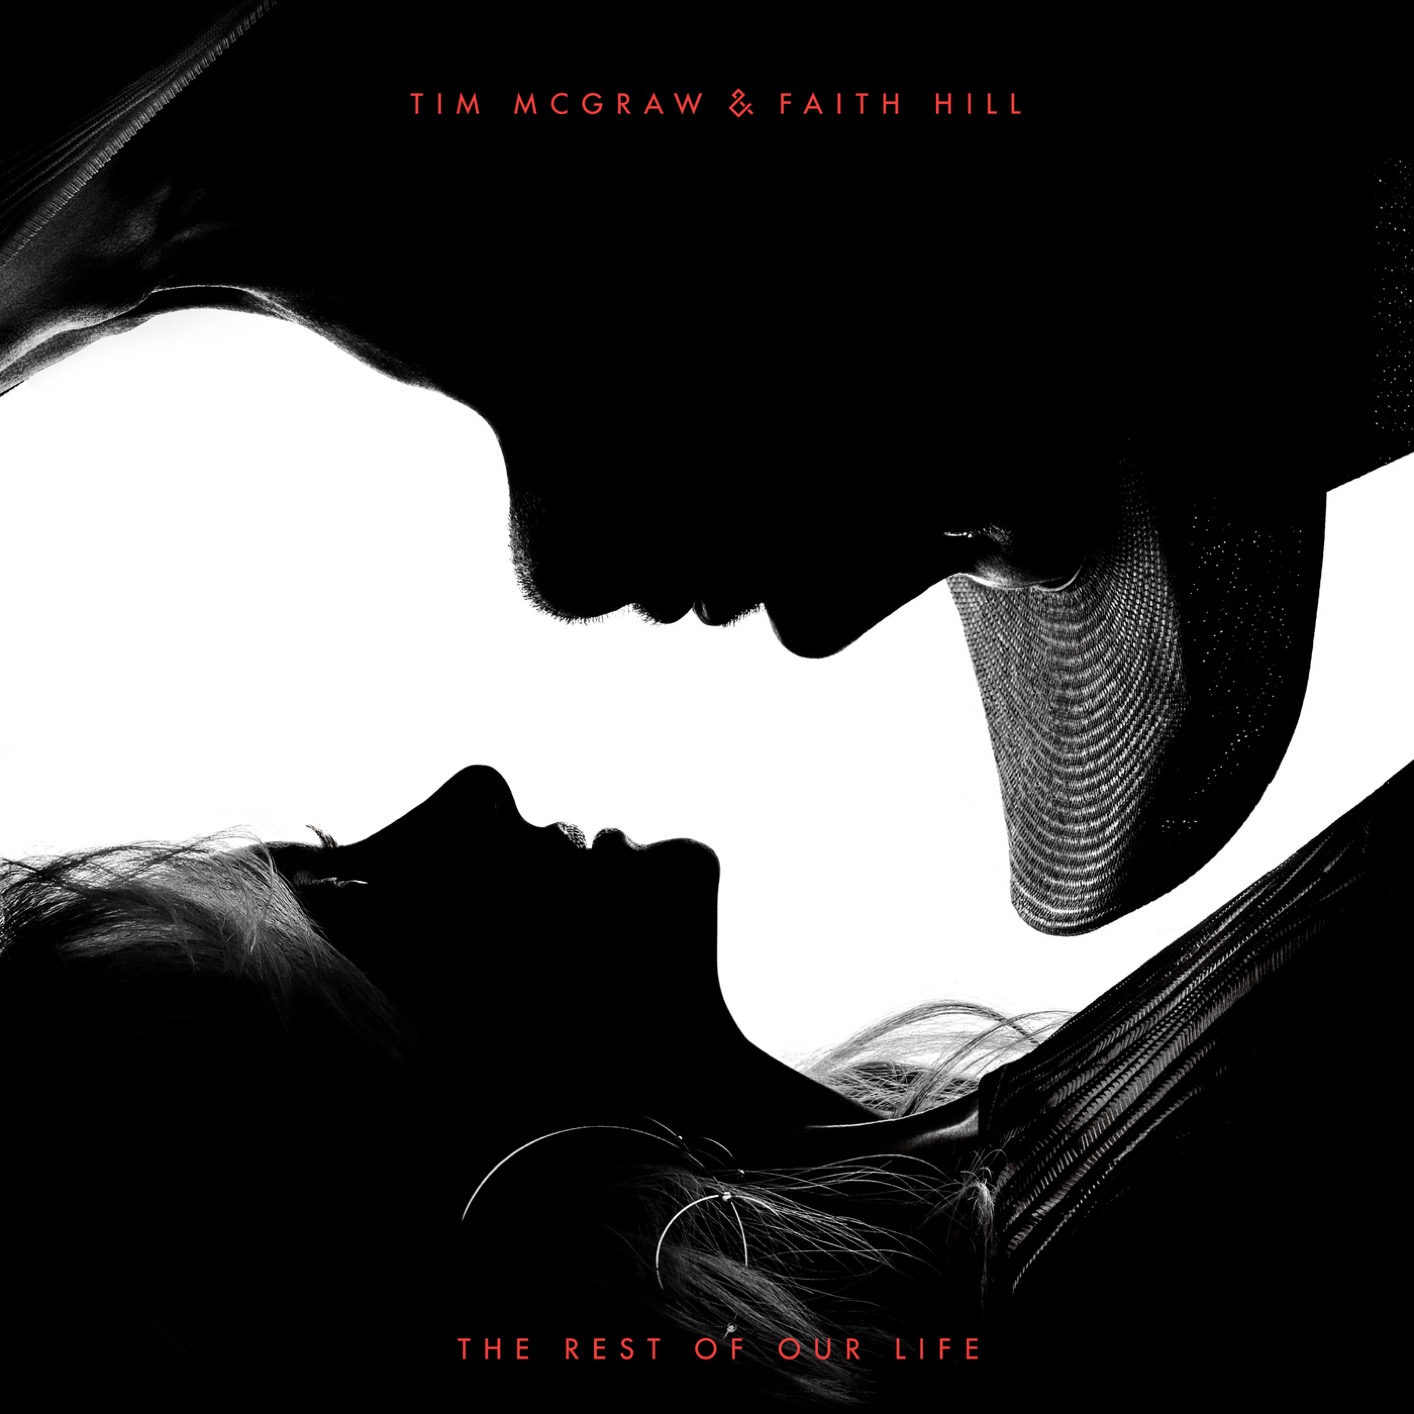 Tim McGraw & Faith Hill - The Rest of Our Life (2017) [Qobuz FLAC 24bit/44,1kHz]